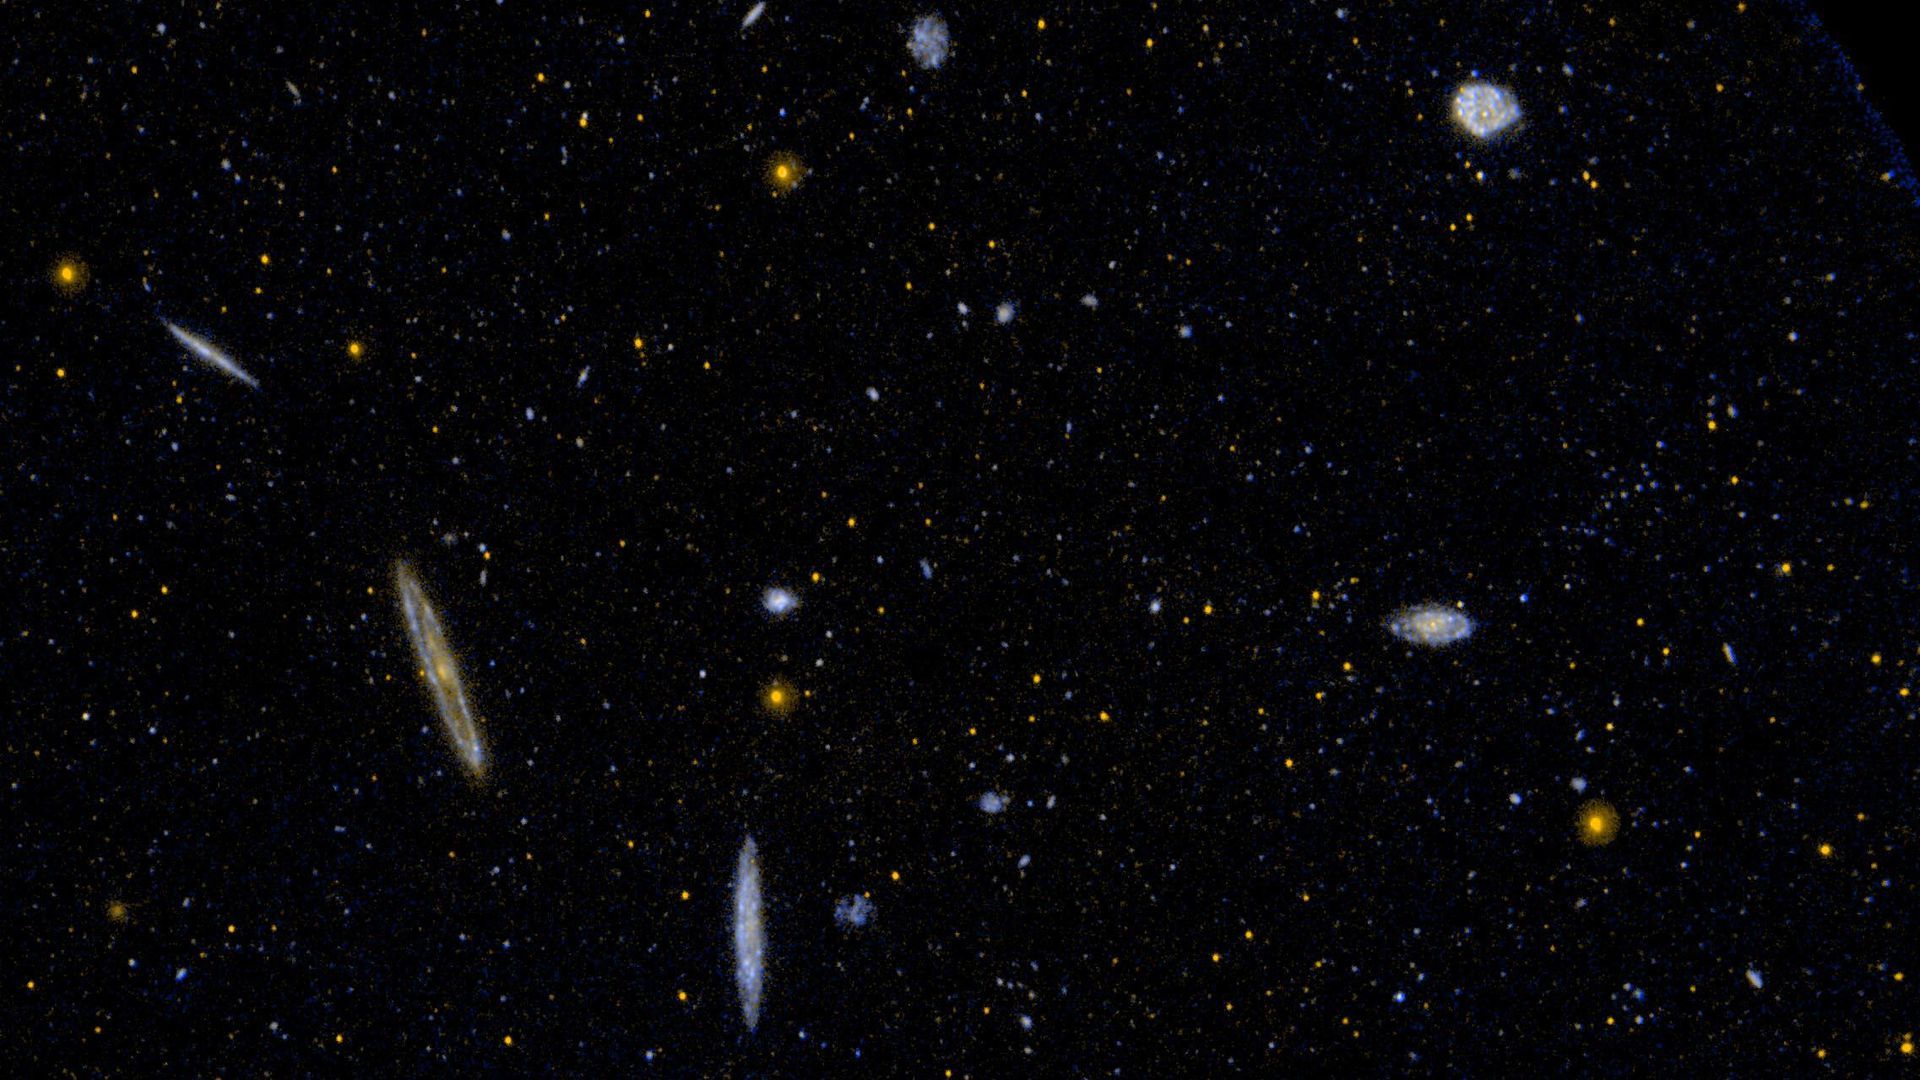 A view of part of the Virgo cluster of galaxies.